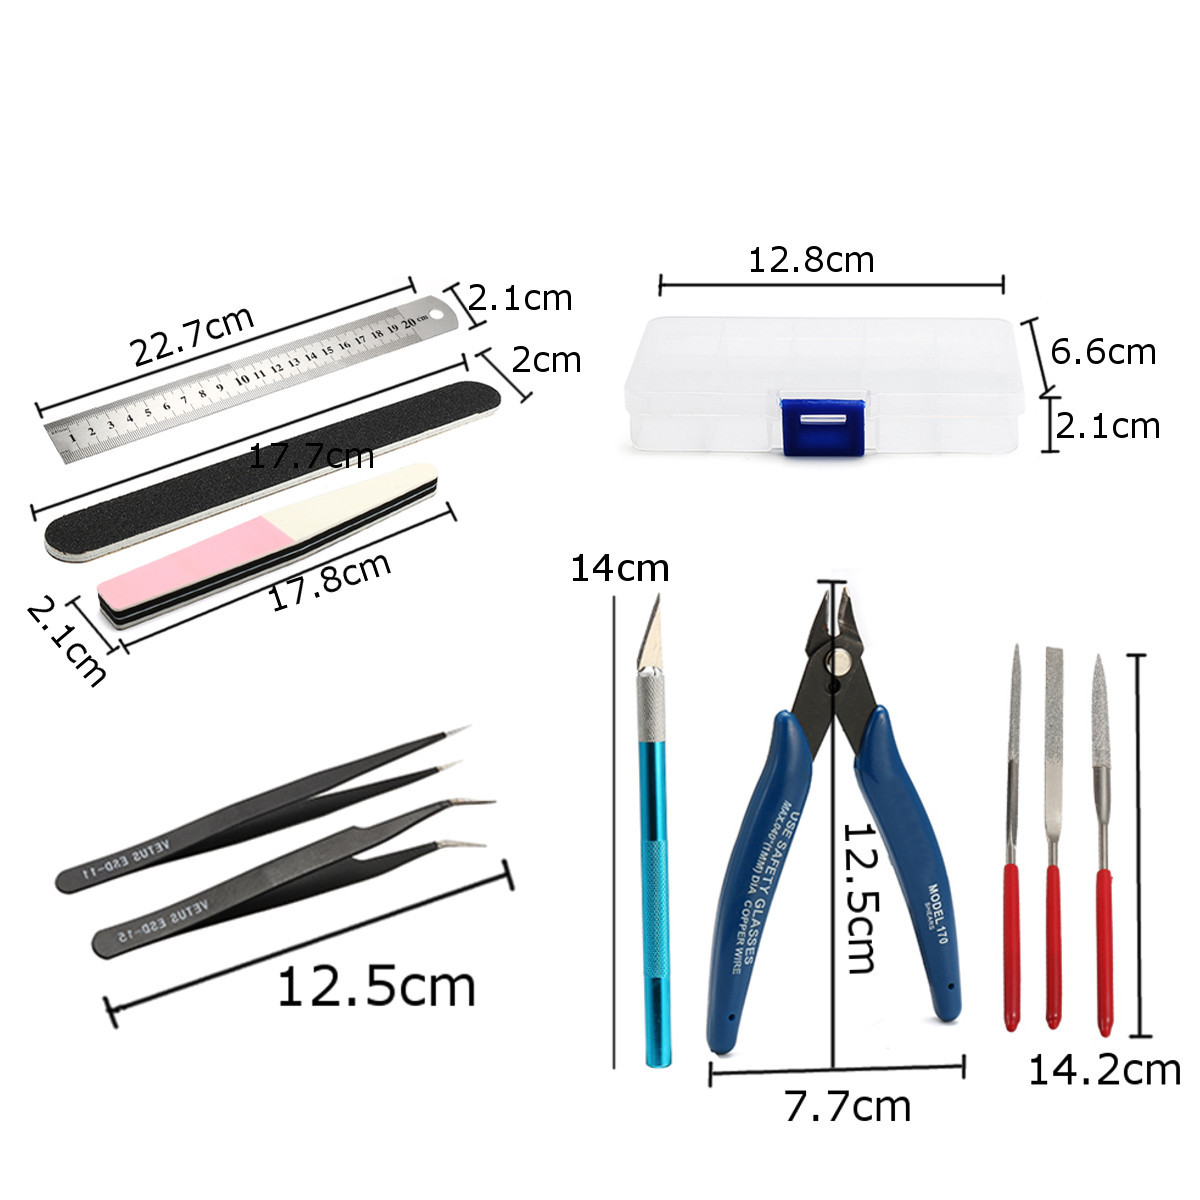 Model Building Tools Combo For Gundam Tools Military Hobby Model DIY Accessories Grinding Cutting Polishing Tools Set New